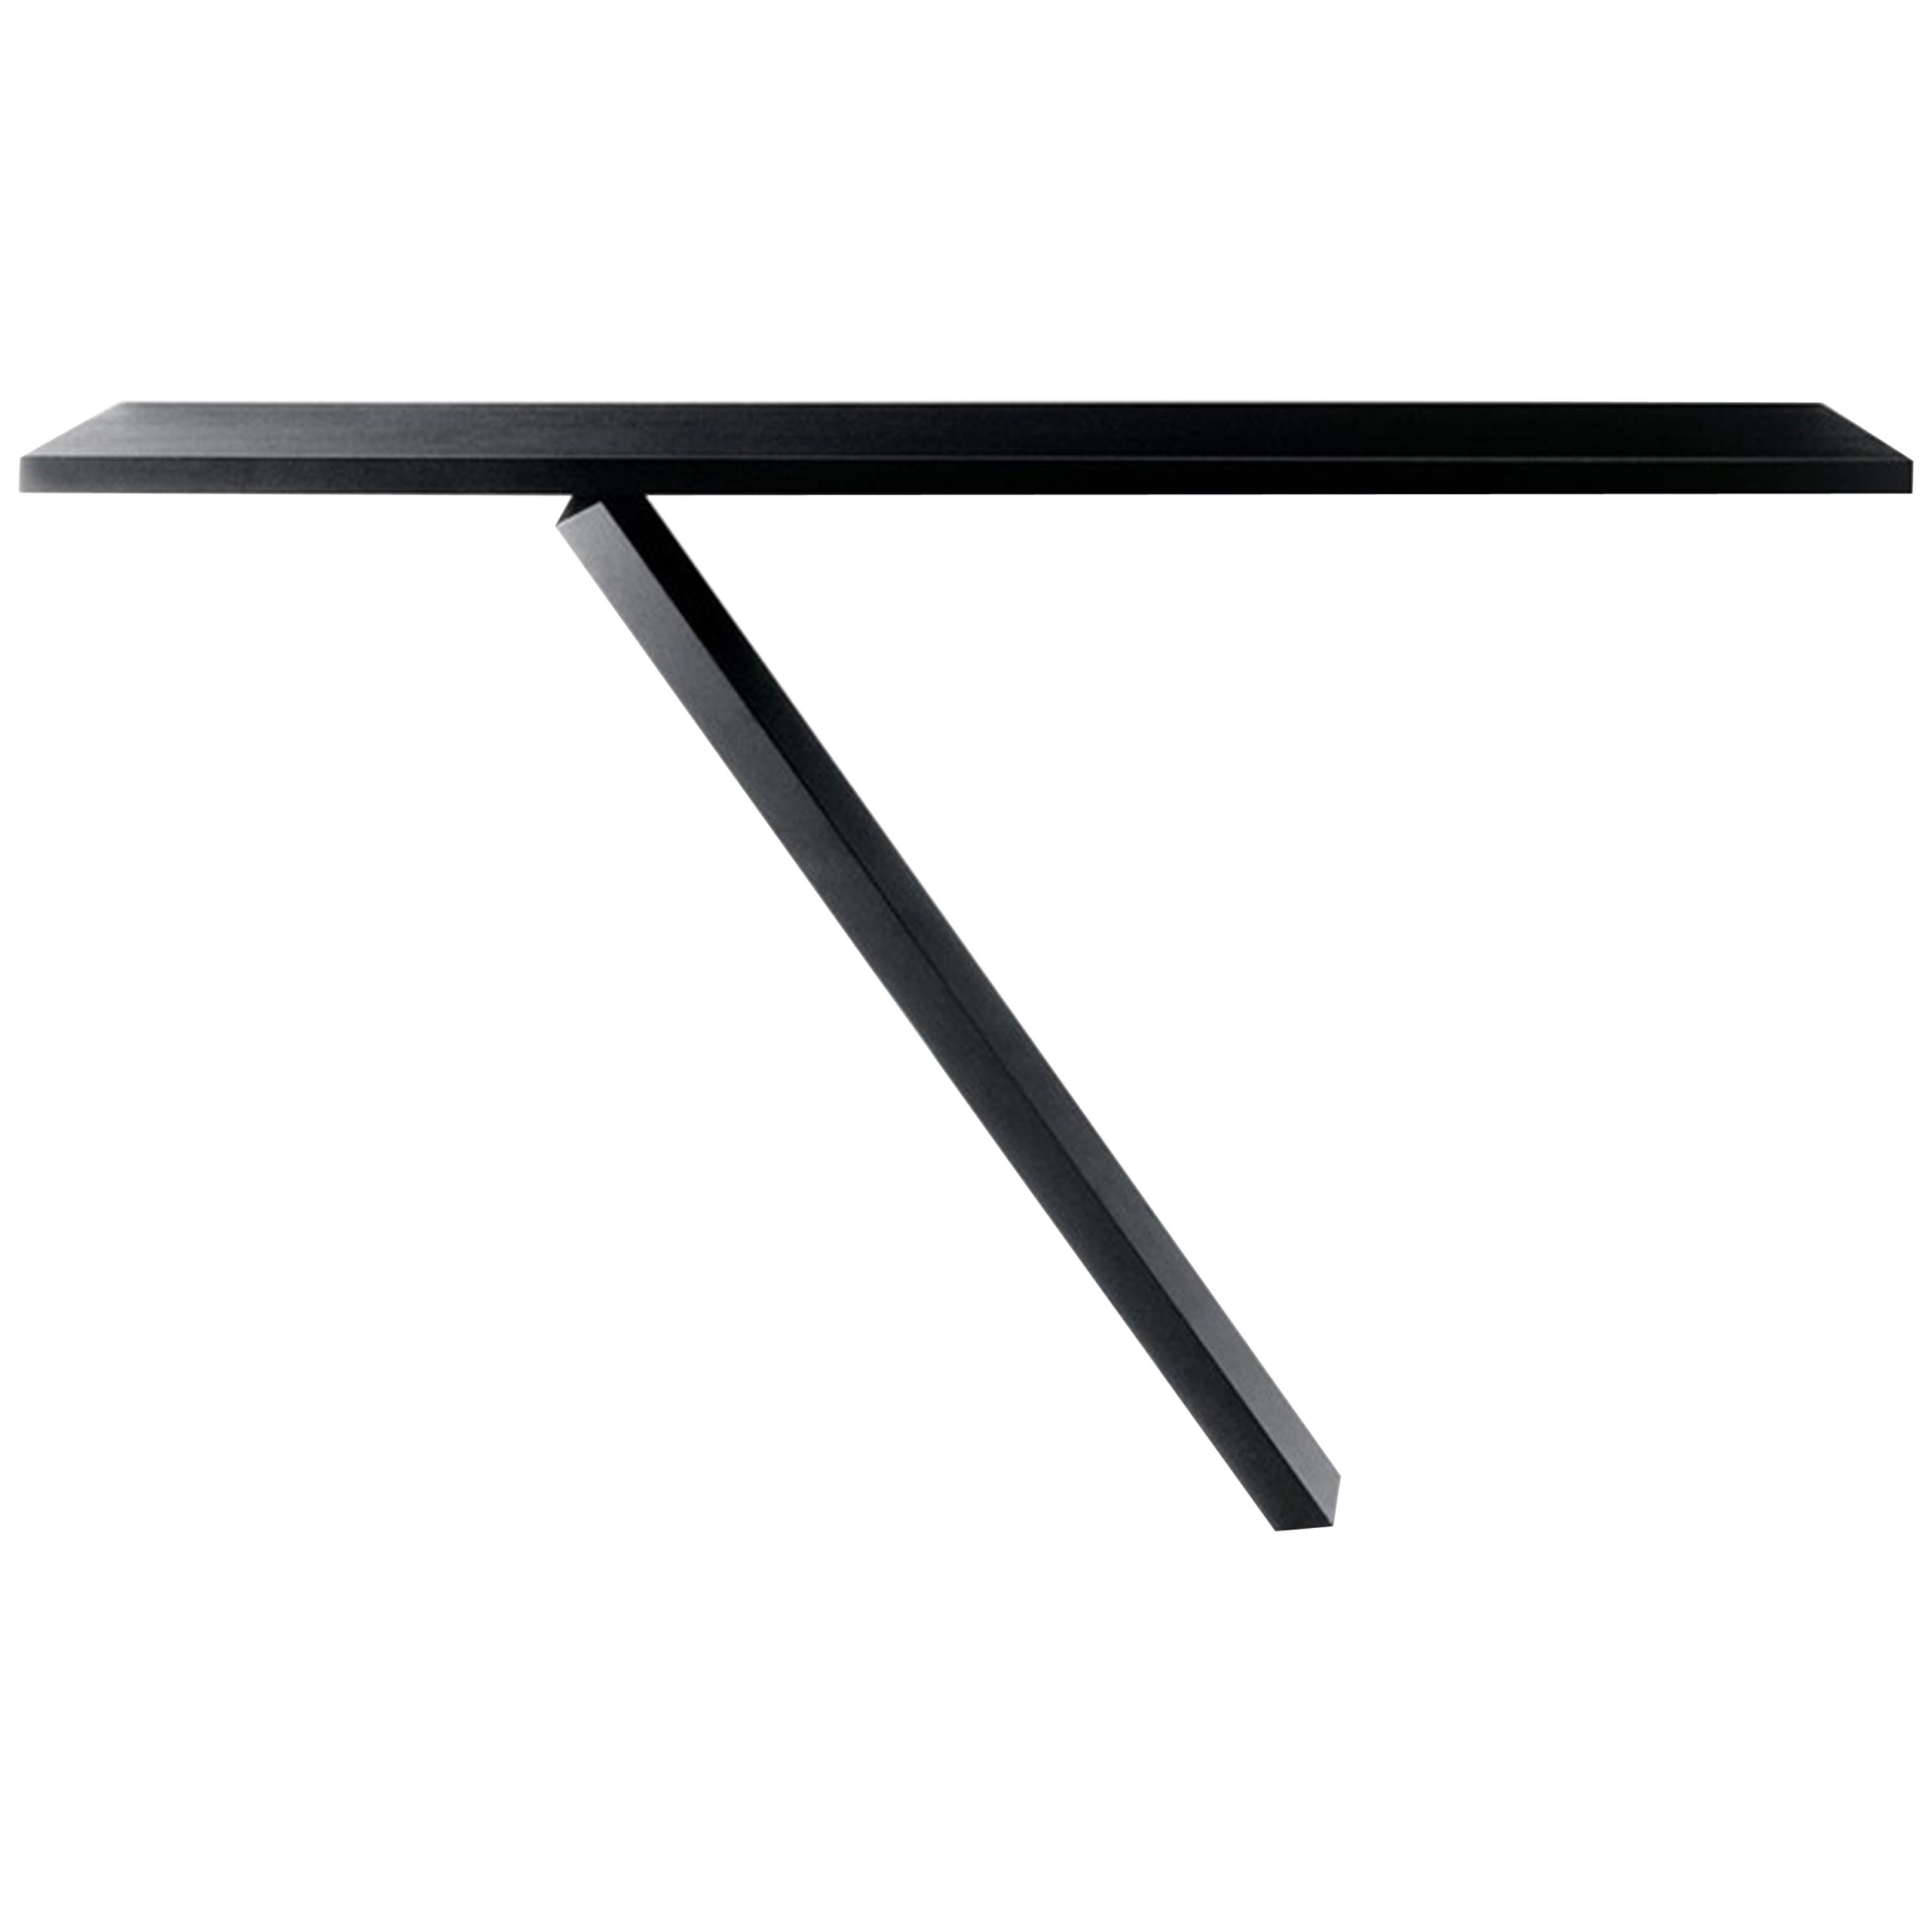 Desalto Element Console Table by Tokujin Yoshioka For Sale